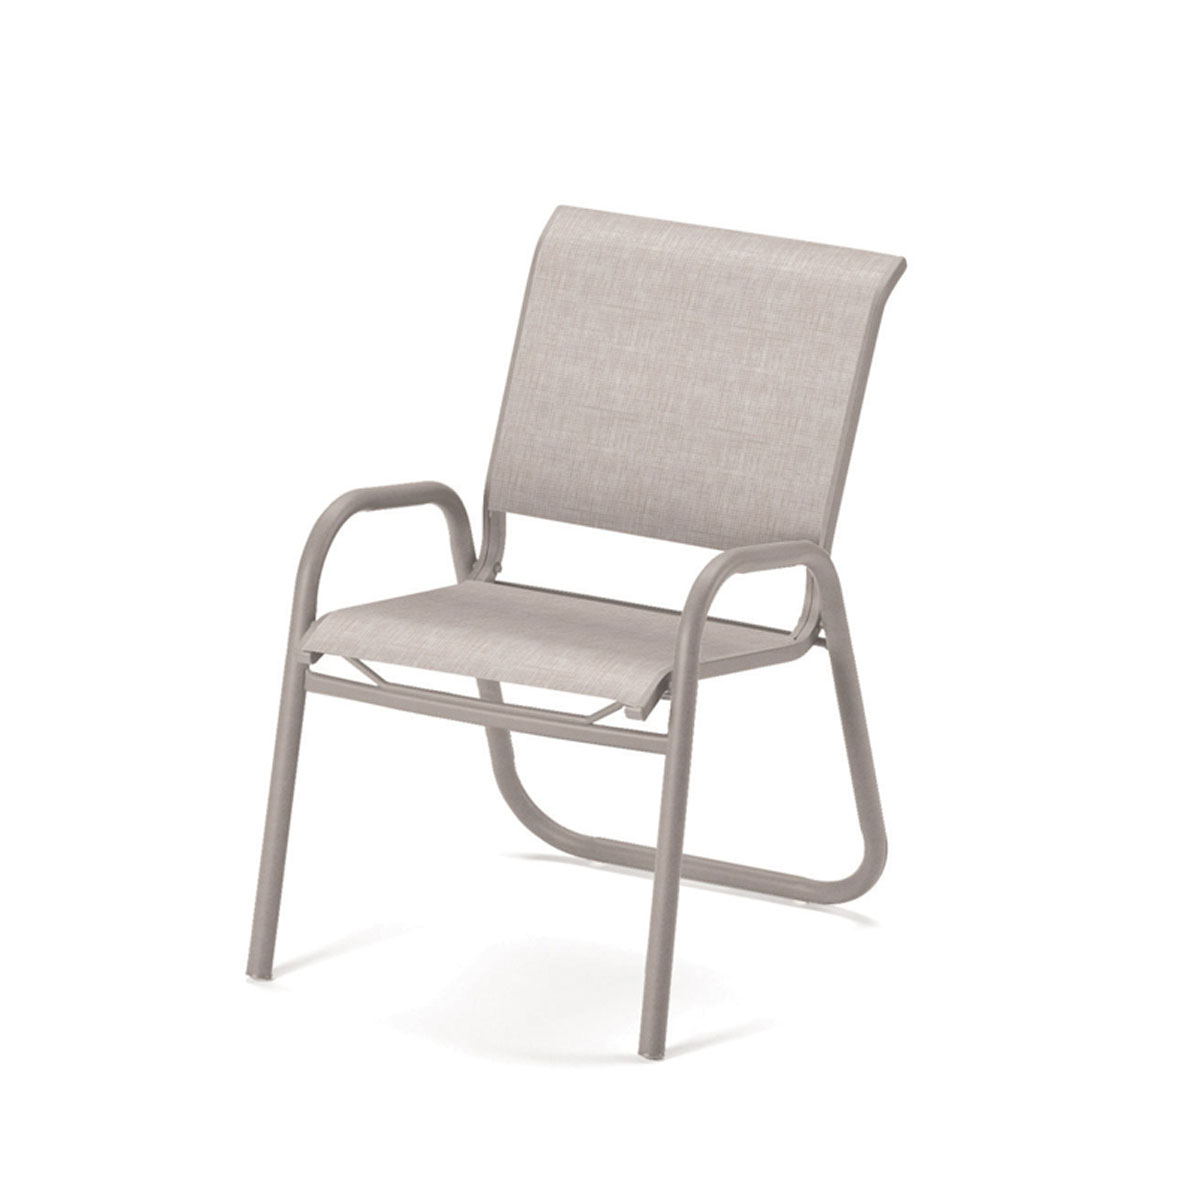 Telescope Casual Gardenella Sling Stacking Cafe Chair